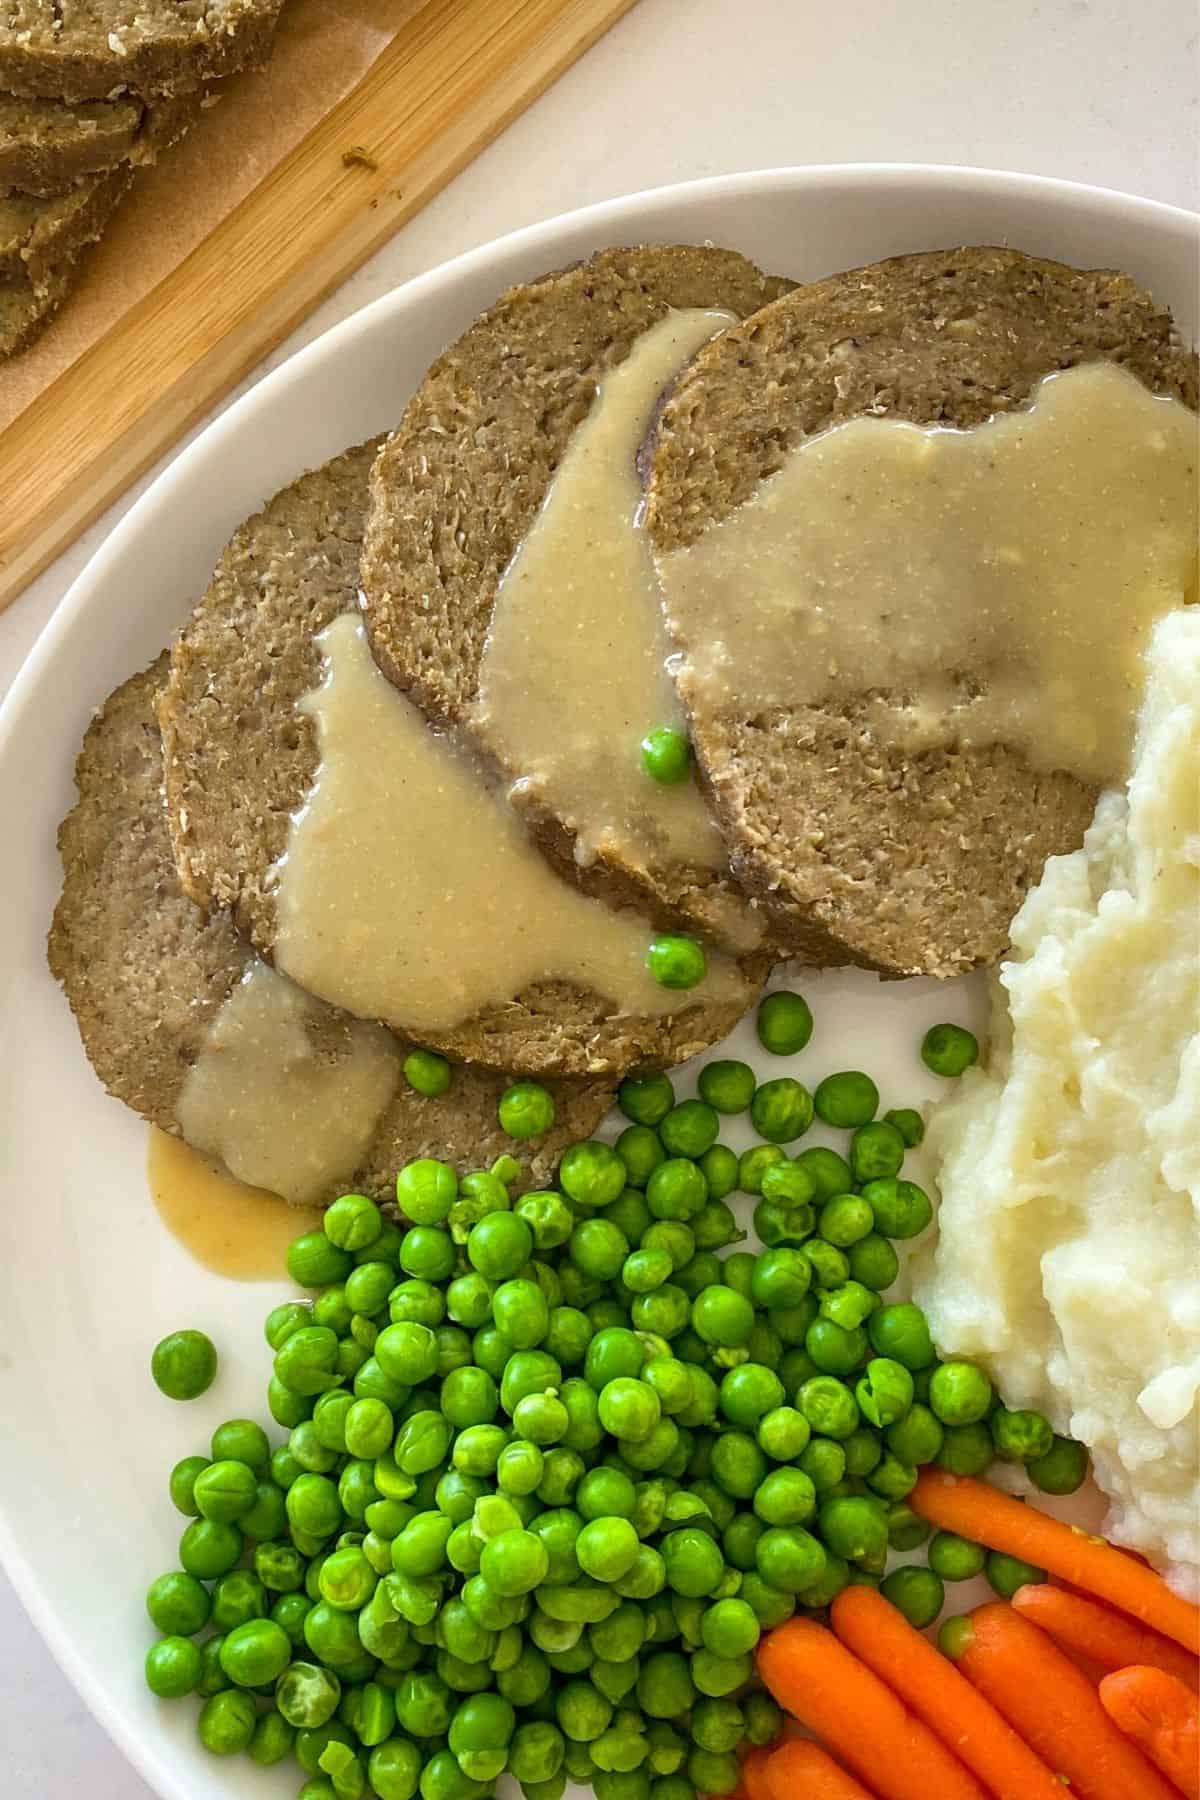 Vegan turkey roast slices on white plate with mashed potatoes, peas and carrots.